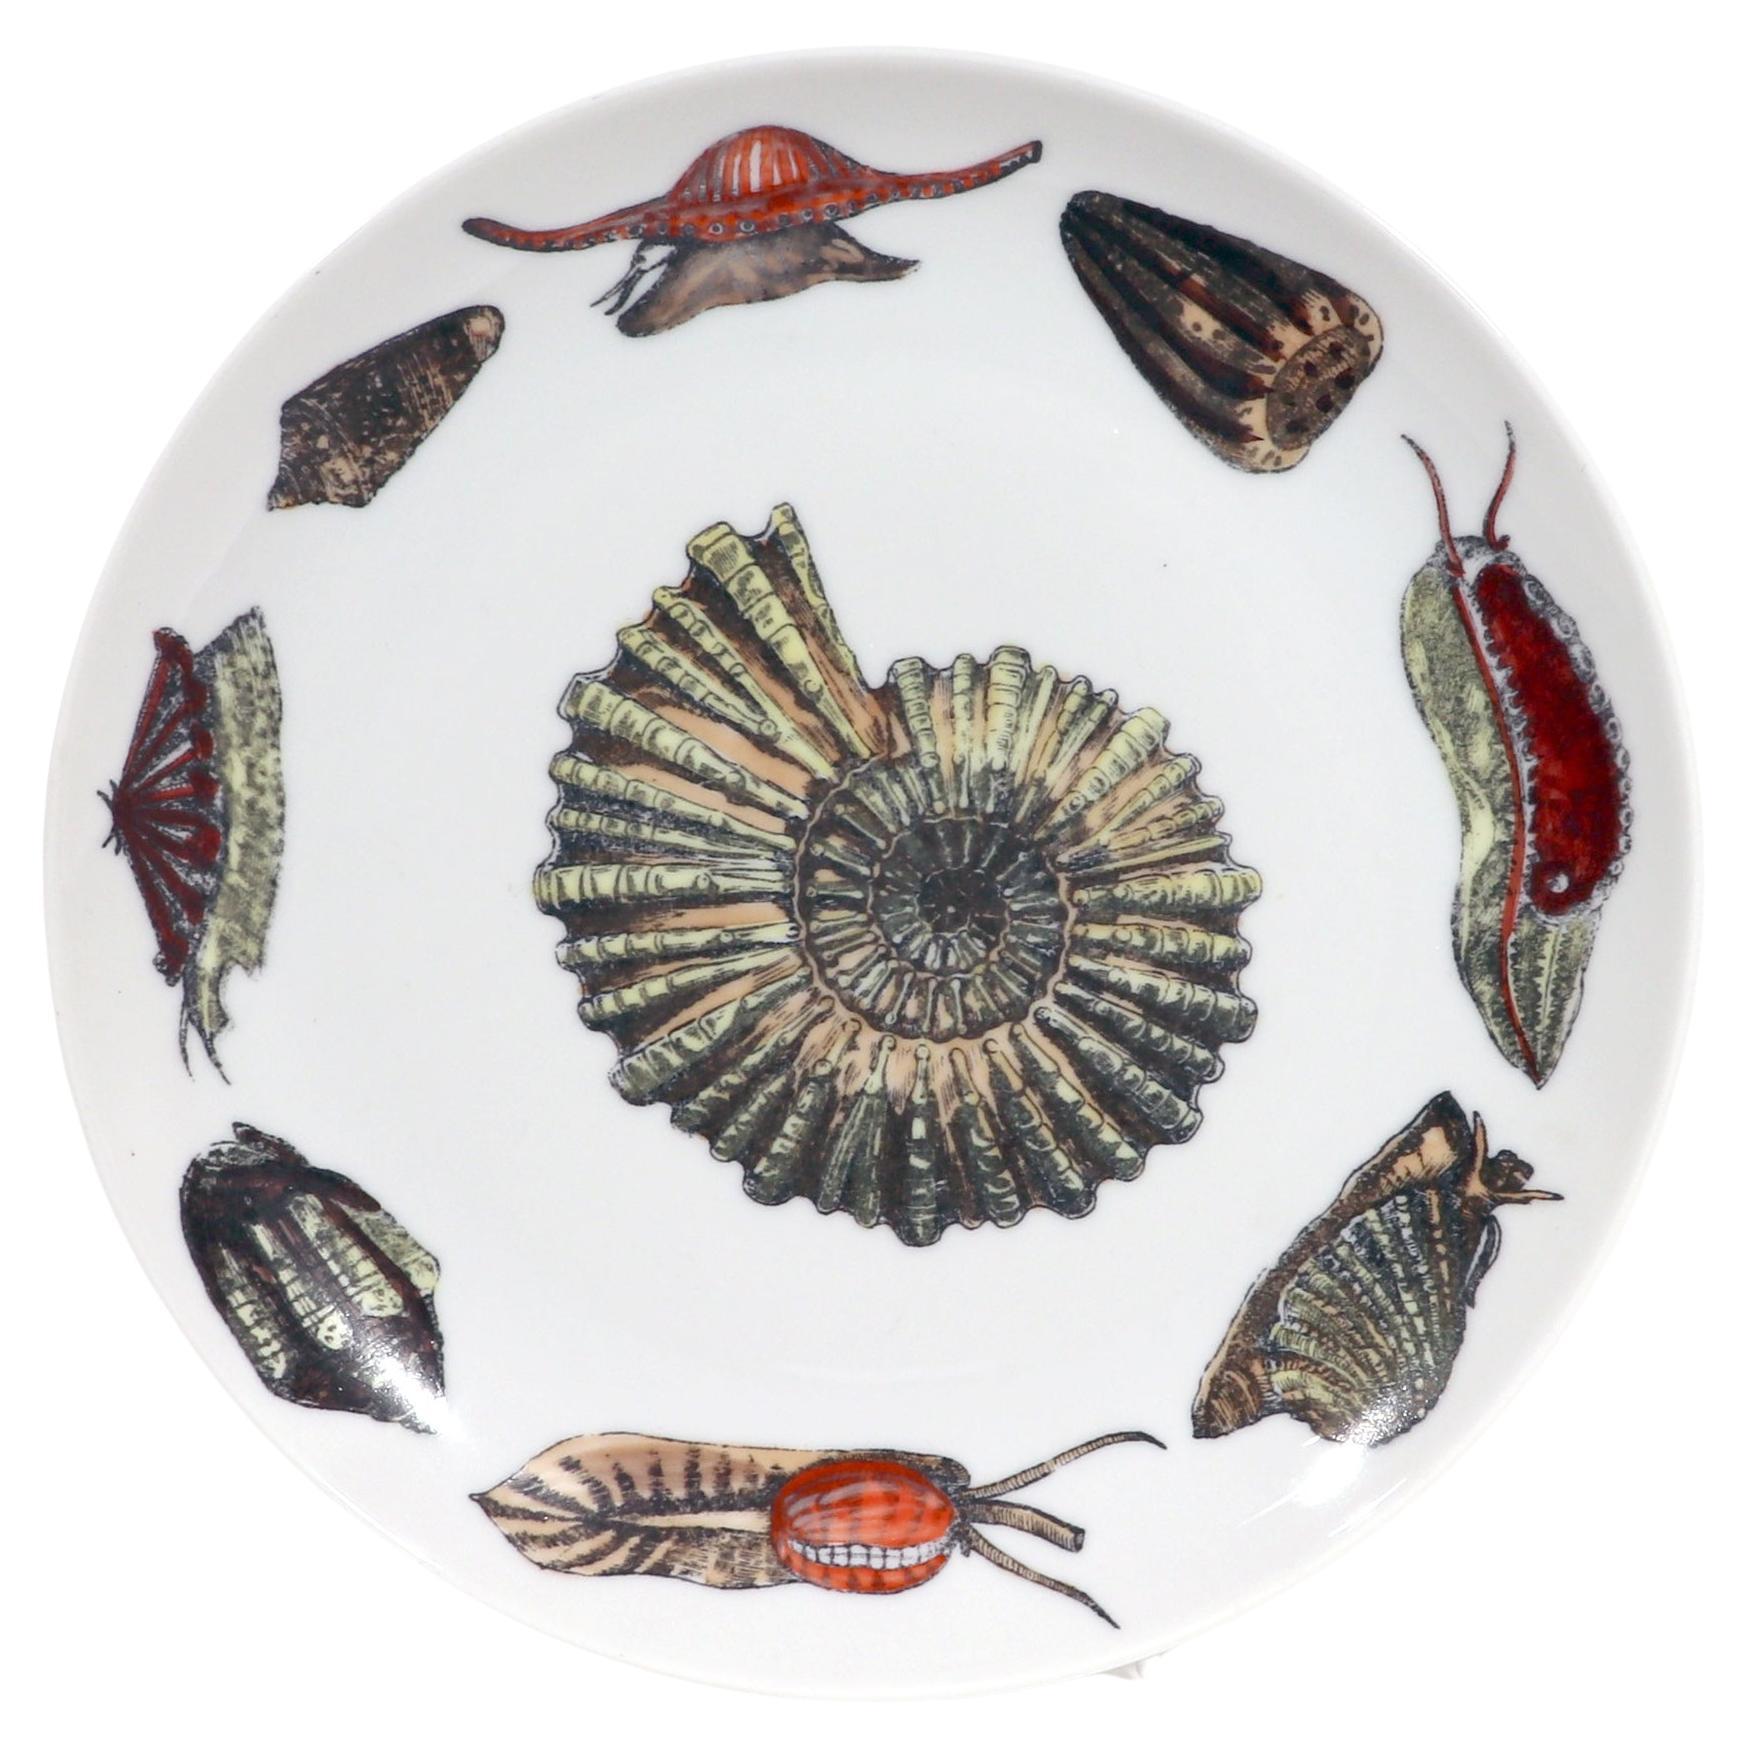 Piero Fornasetti Porcelain Conchiglie Seashell Plate With Snails and Mollusks,
#8,
Circa 1960s-70s

The Fornasetti plate is decorated in the Conchiglie pattern which depicts different sea shells and sea anemones.  The  plate is transfer printed and